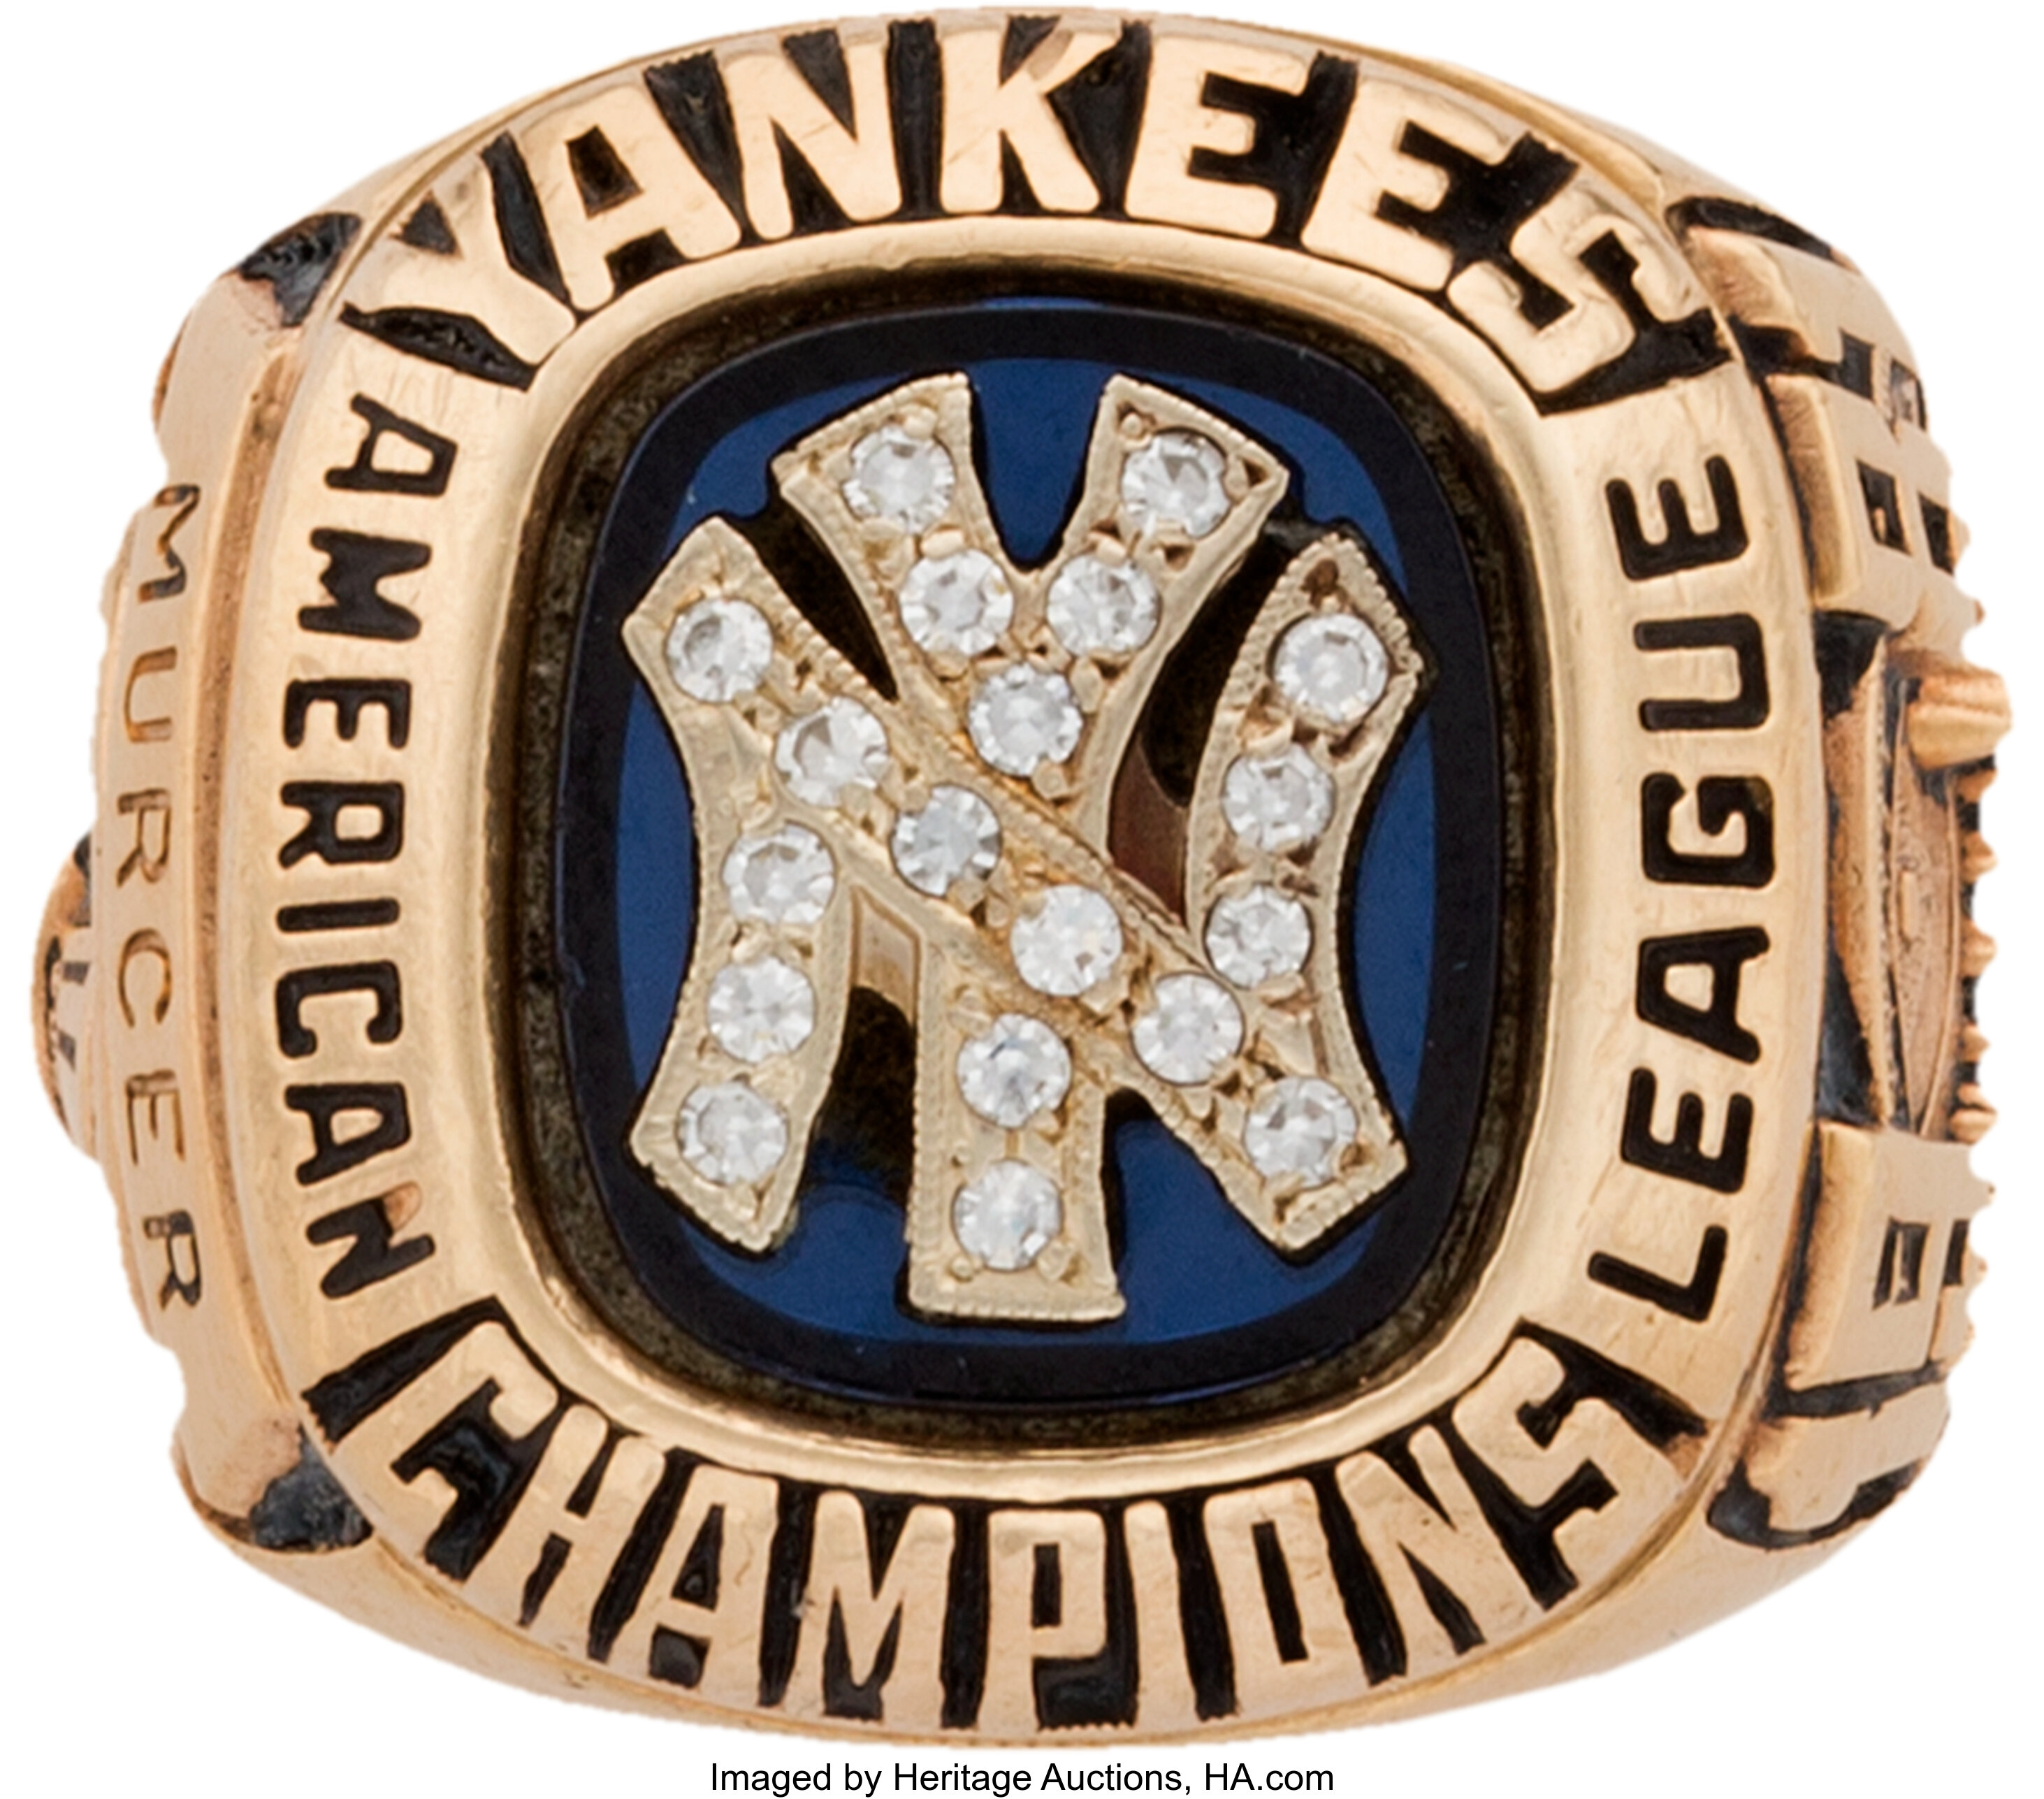 Sold at Auction: 1979 Baltimore Orioles American League Championship ring.